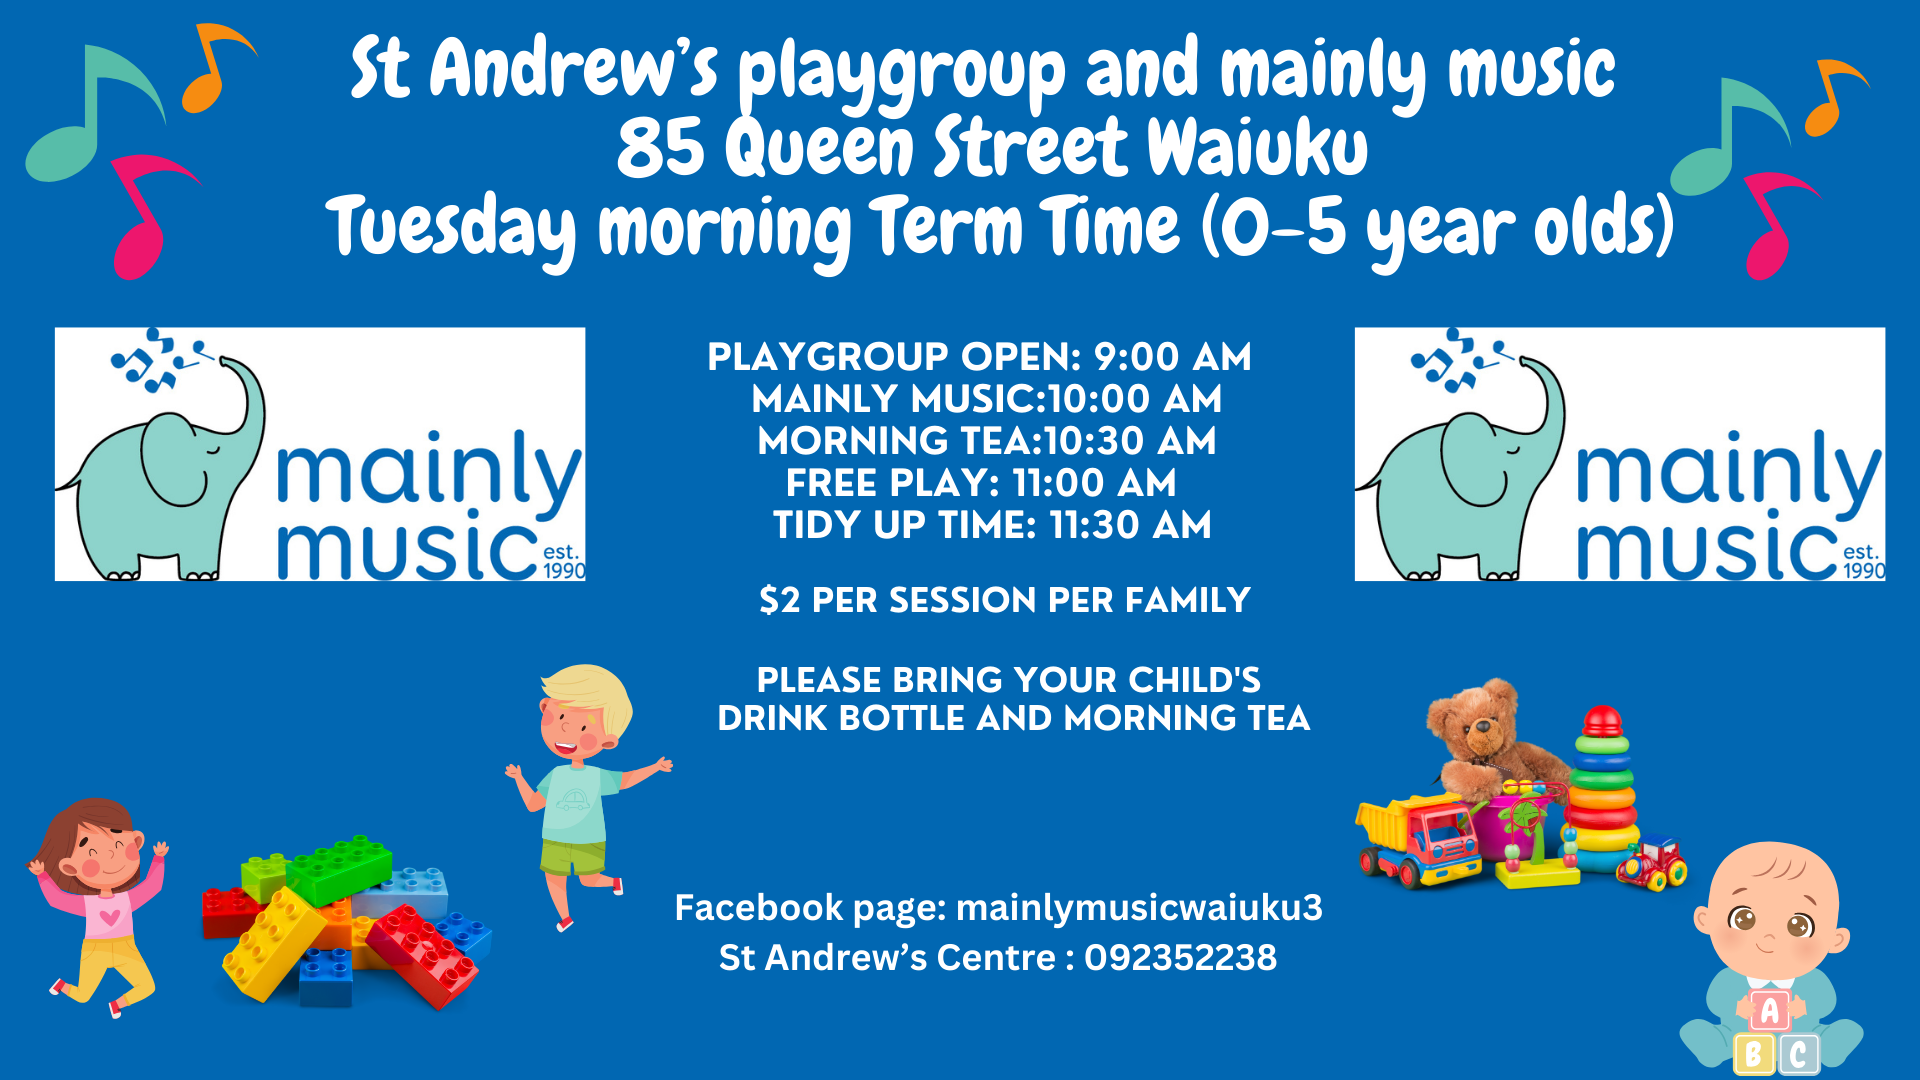 St Andrews playgroup and mainly music 1 003